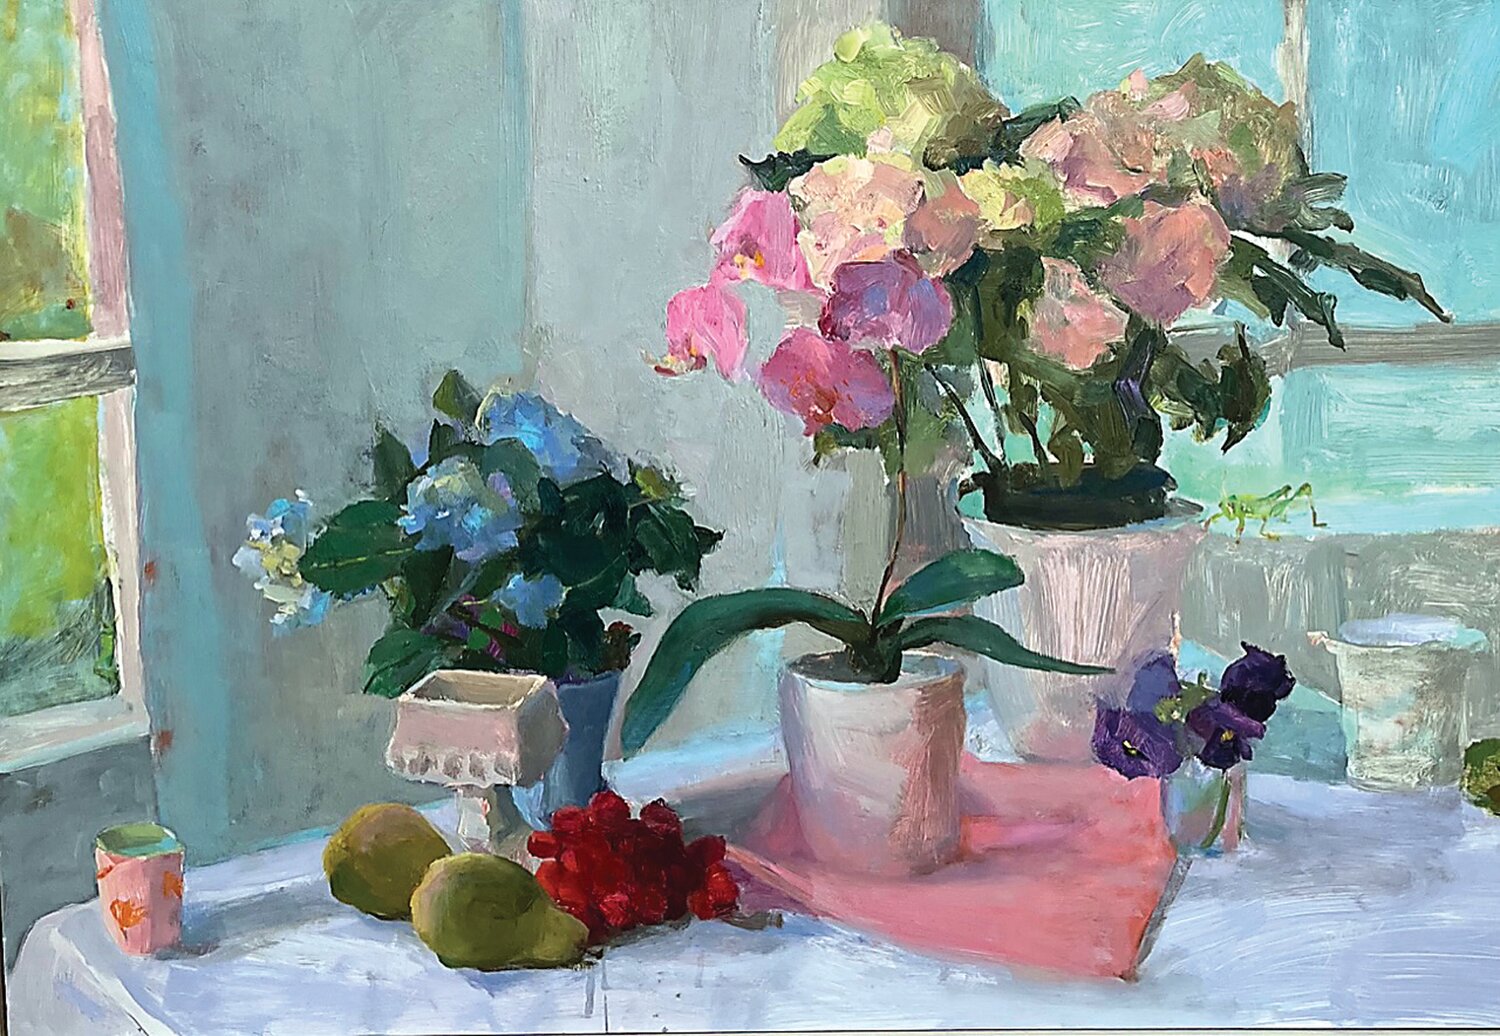 “Flowers by the Window” is an oil painting by Janine Dunn Wade.